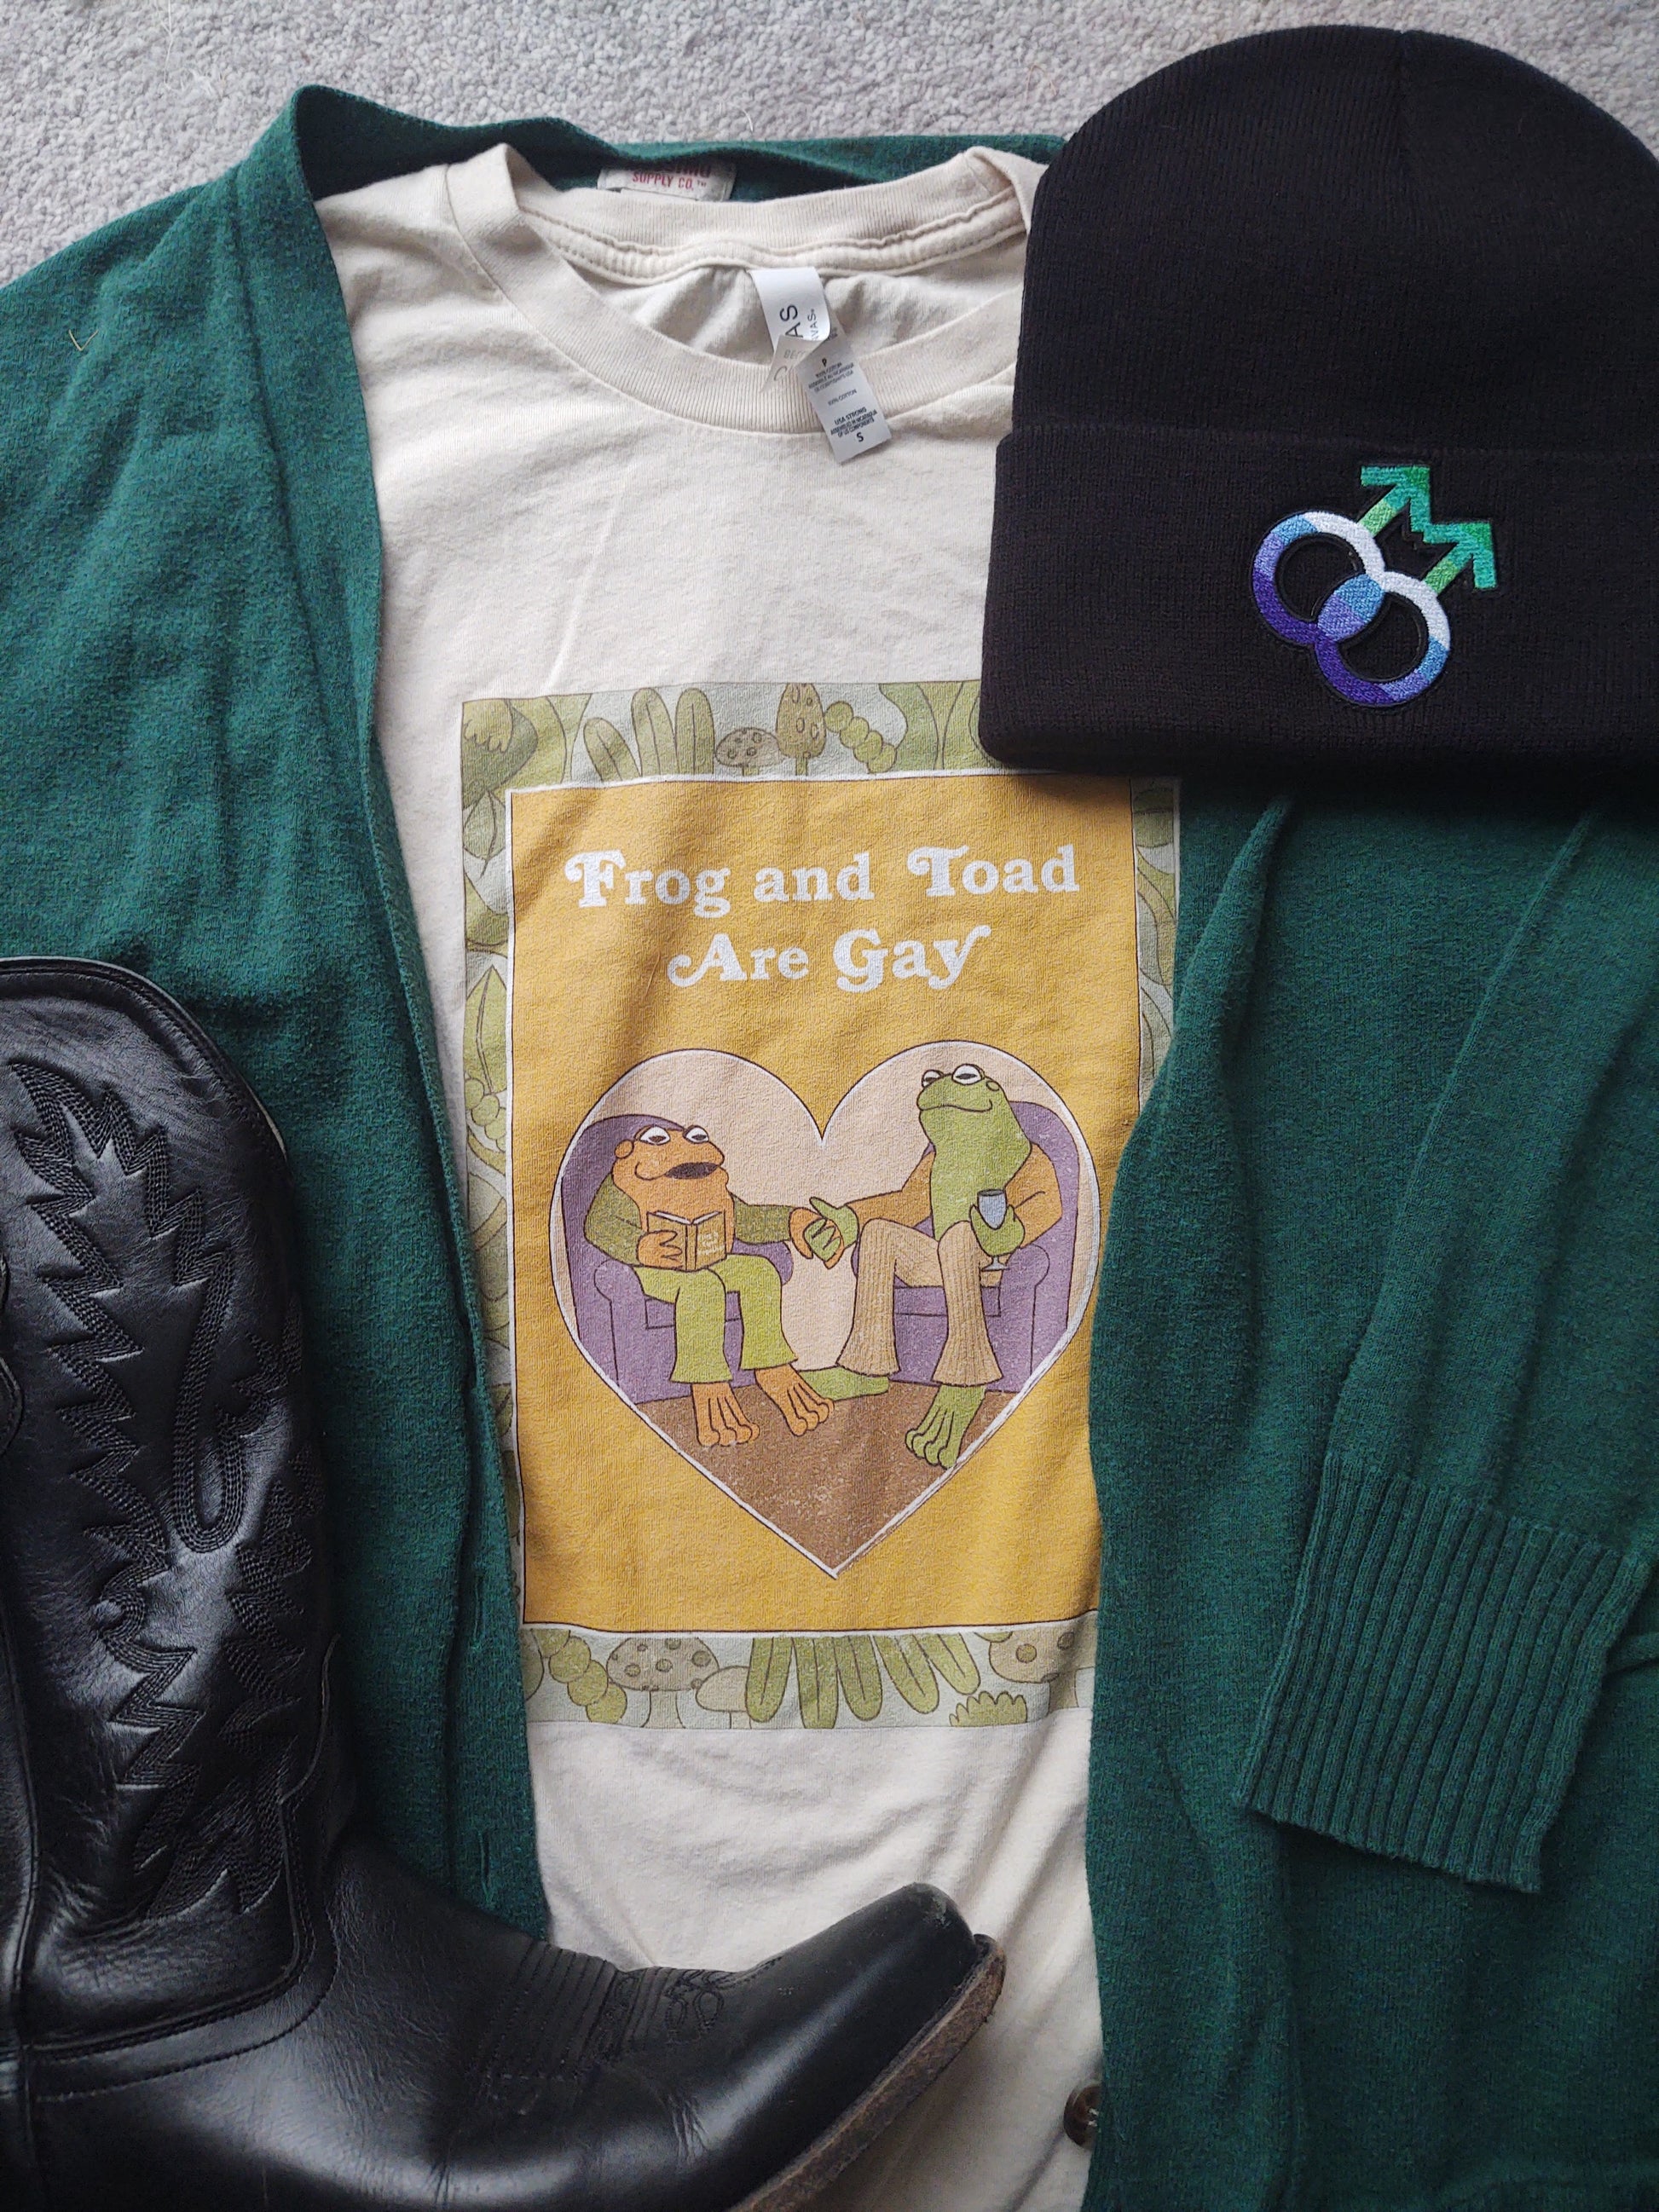 frog and toad shirt flat lay with green cardigan, black boot, and gay mlm beanie